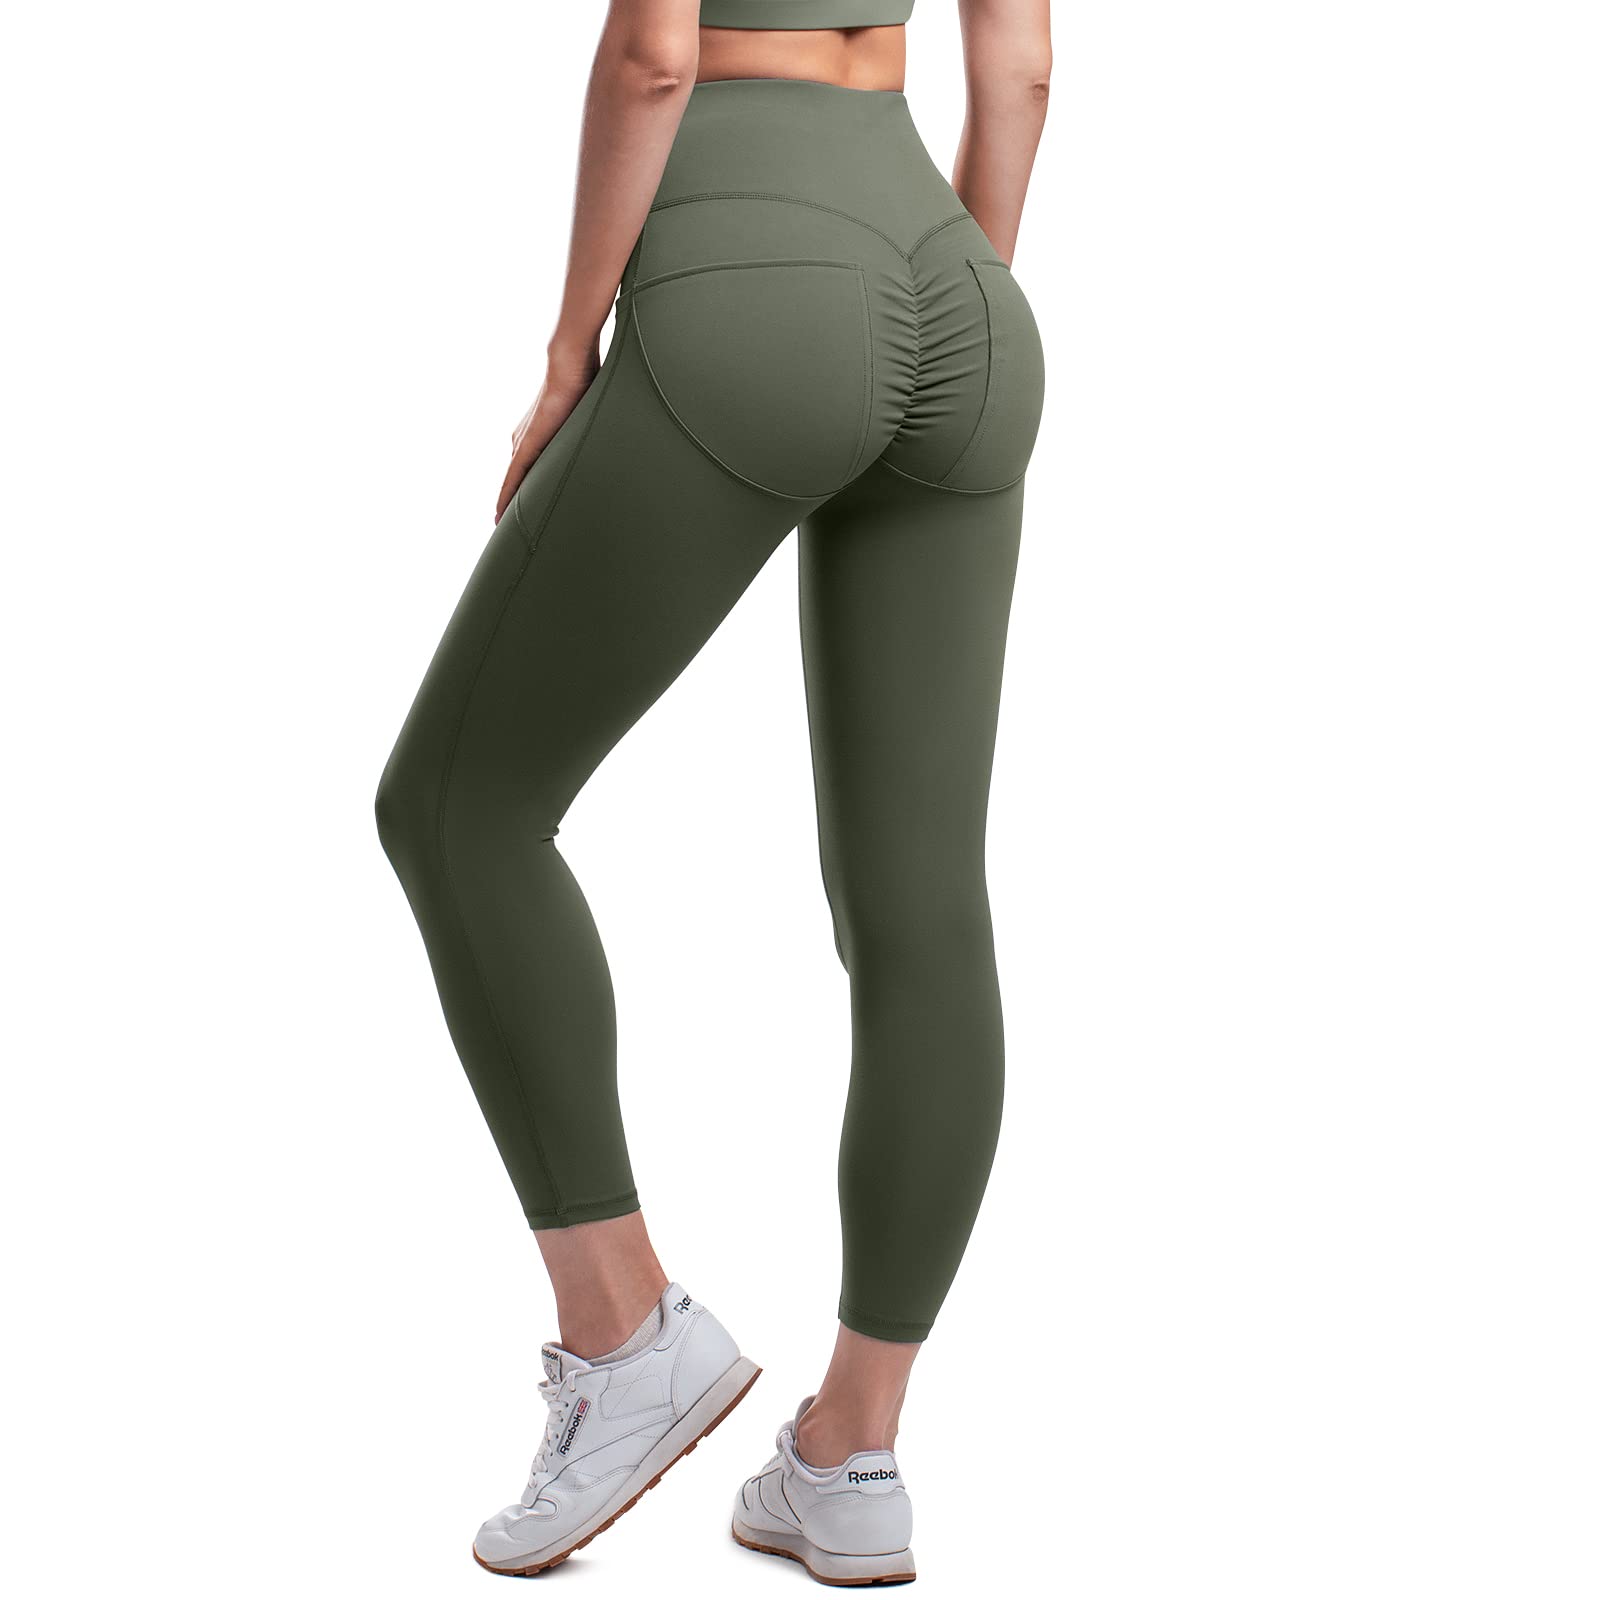 Not Just For Yoga Pants - More Colors Available – Blue Magnolia